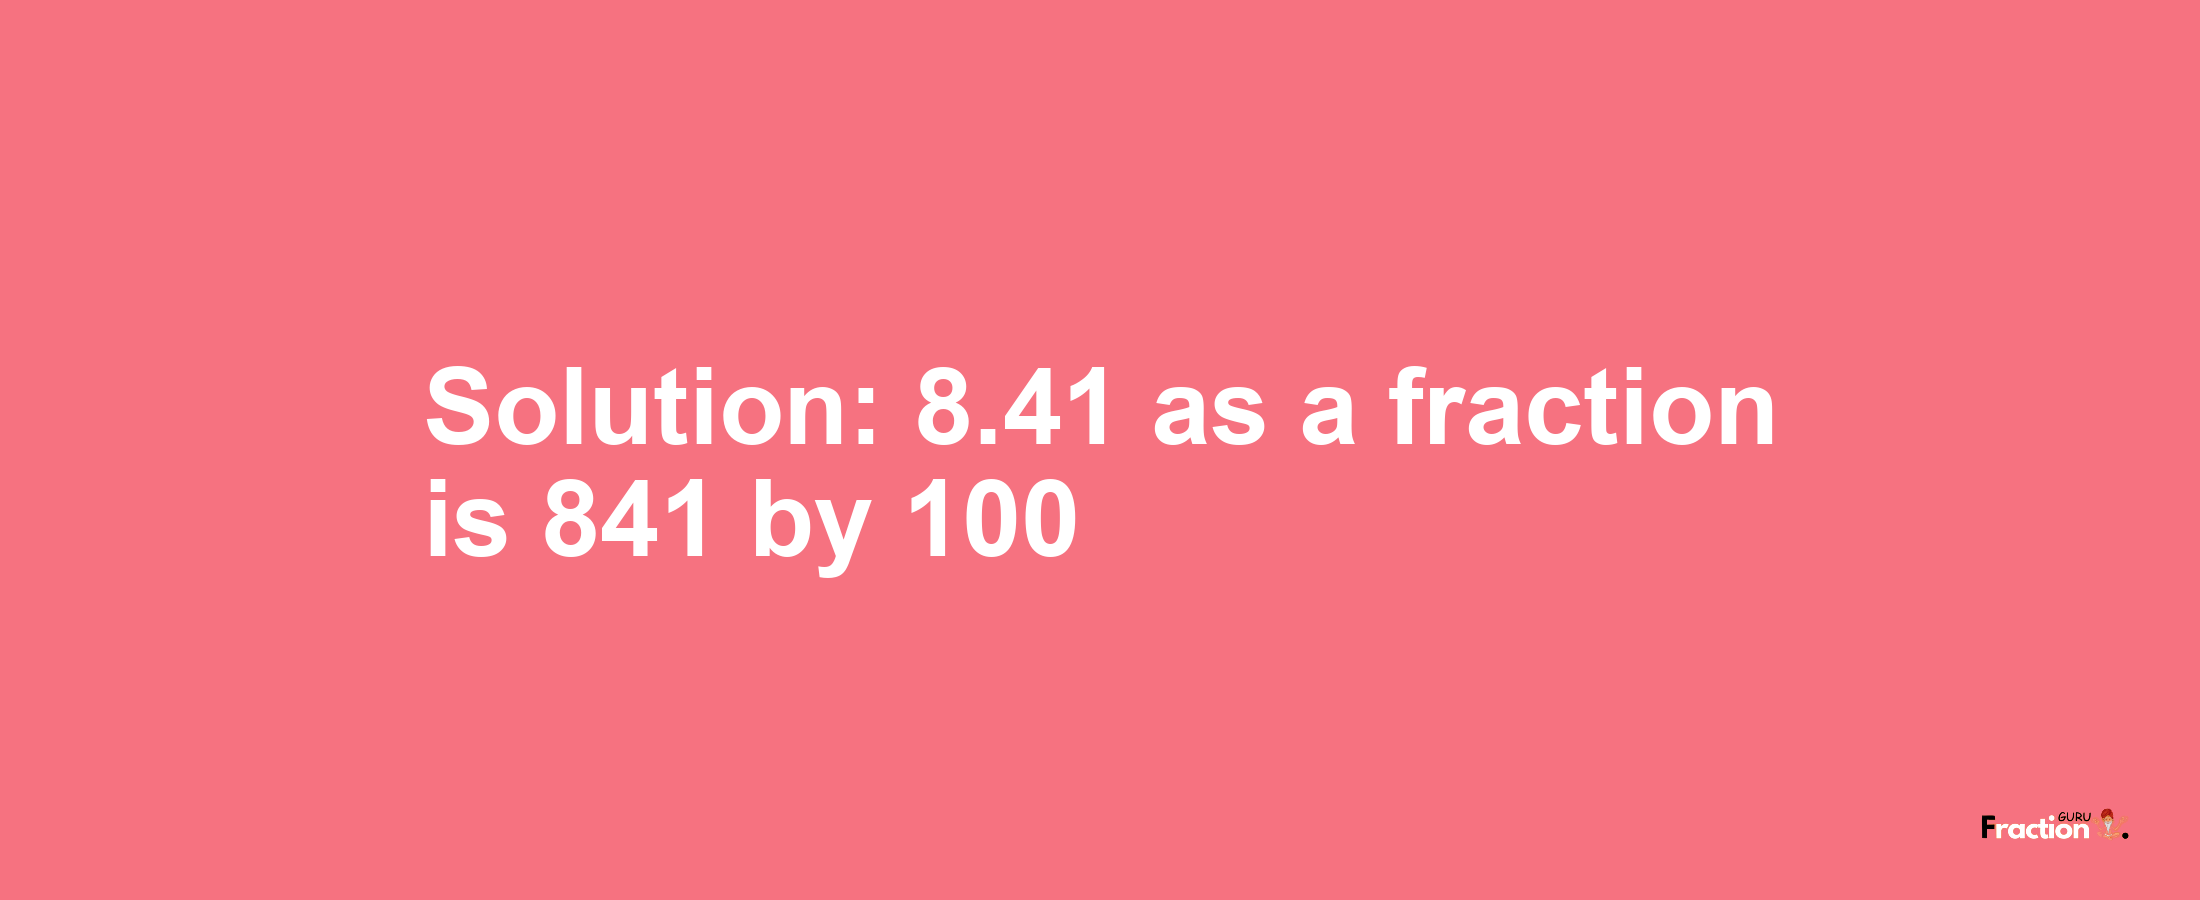 Solution:8.41 as a fraction is 841/100